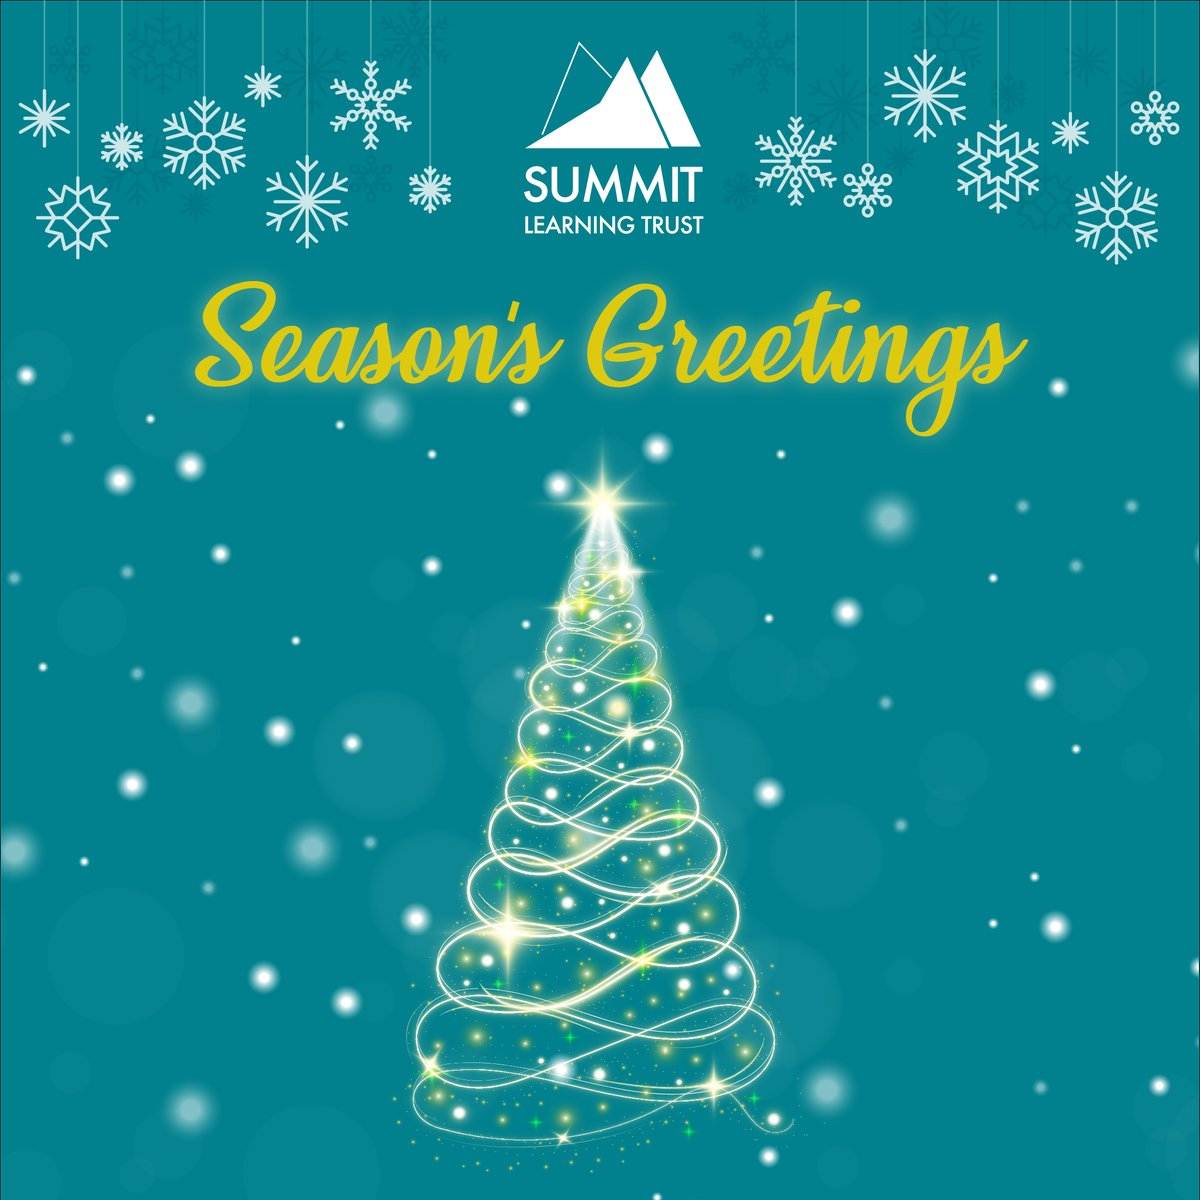 Season's greetings to our learners, parents, carers, colleagues and all associated with Summit Learning Trust. Wishing all a happy and restful festive break. @Ninestiles @LyndonSchool @sfcsapply @CockshutHillSch @YarnfieldSch @PegasusPrimary @ErdingtonHallPS @TheOaklandsBham